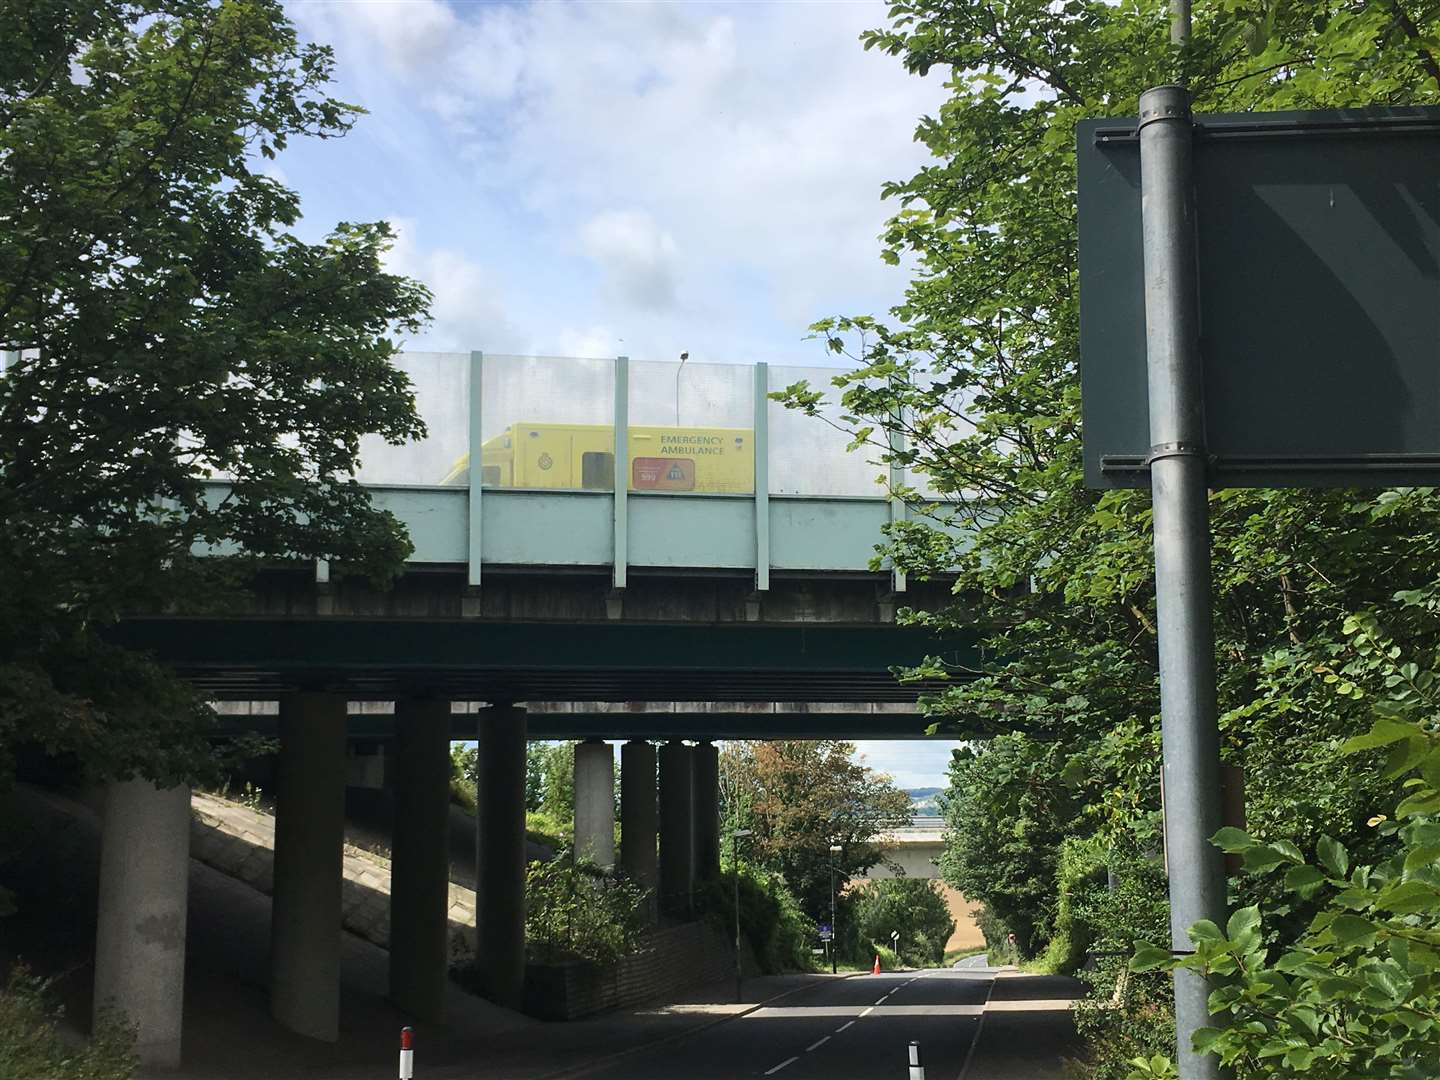 An ambulance was spotted on the bridge over Borstal Street (14076924)